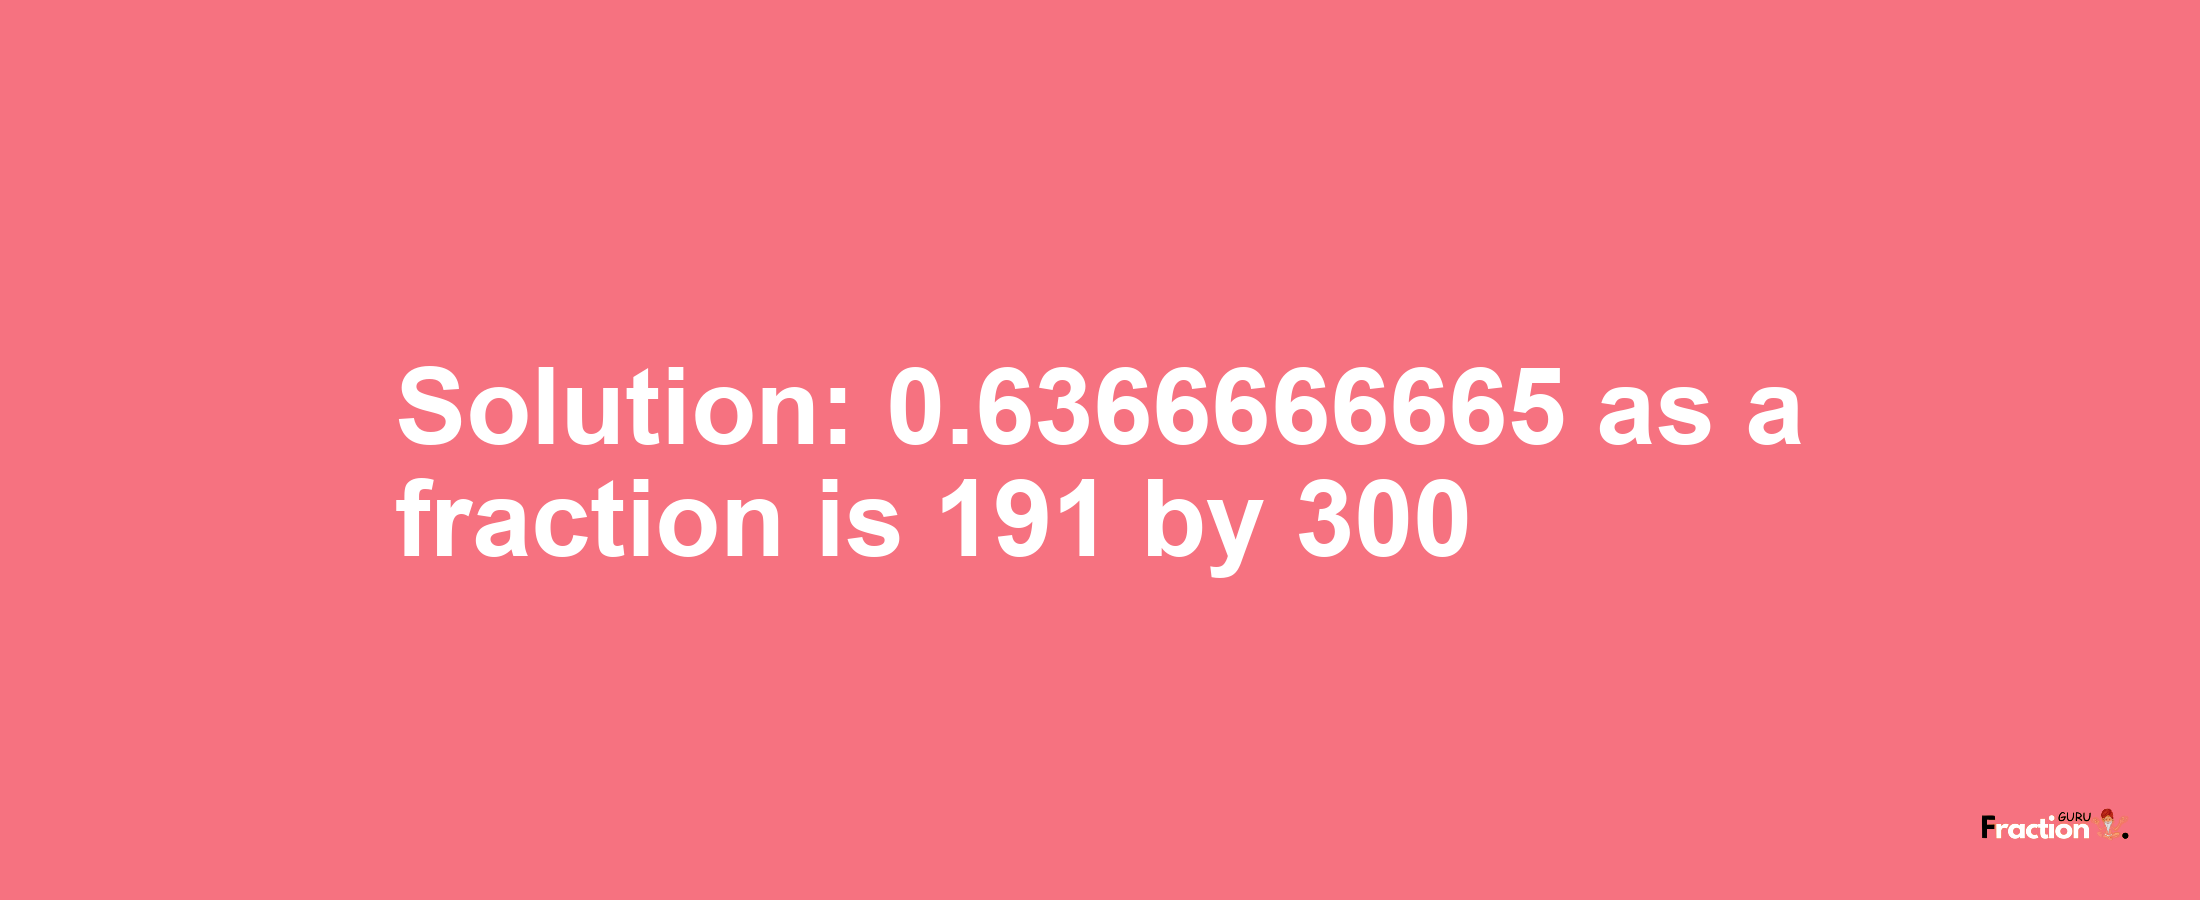 Solution:0.6366666665 as a fraction is 191/300